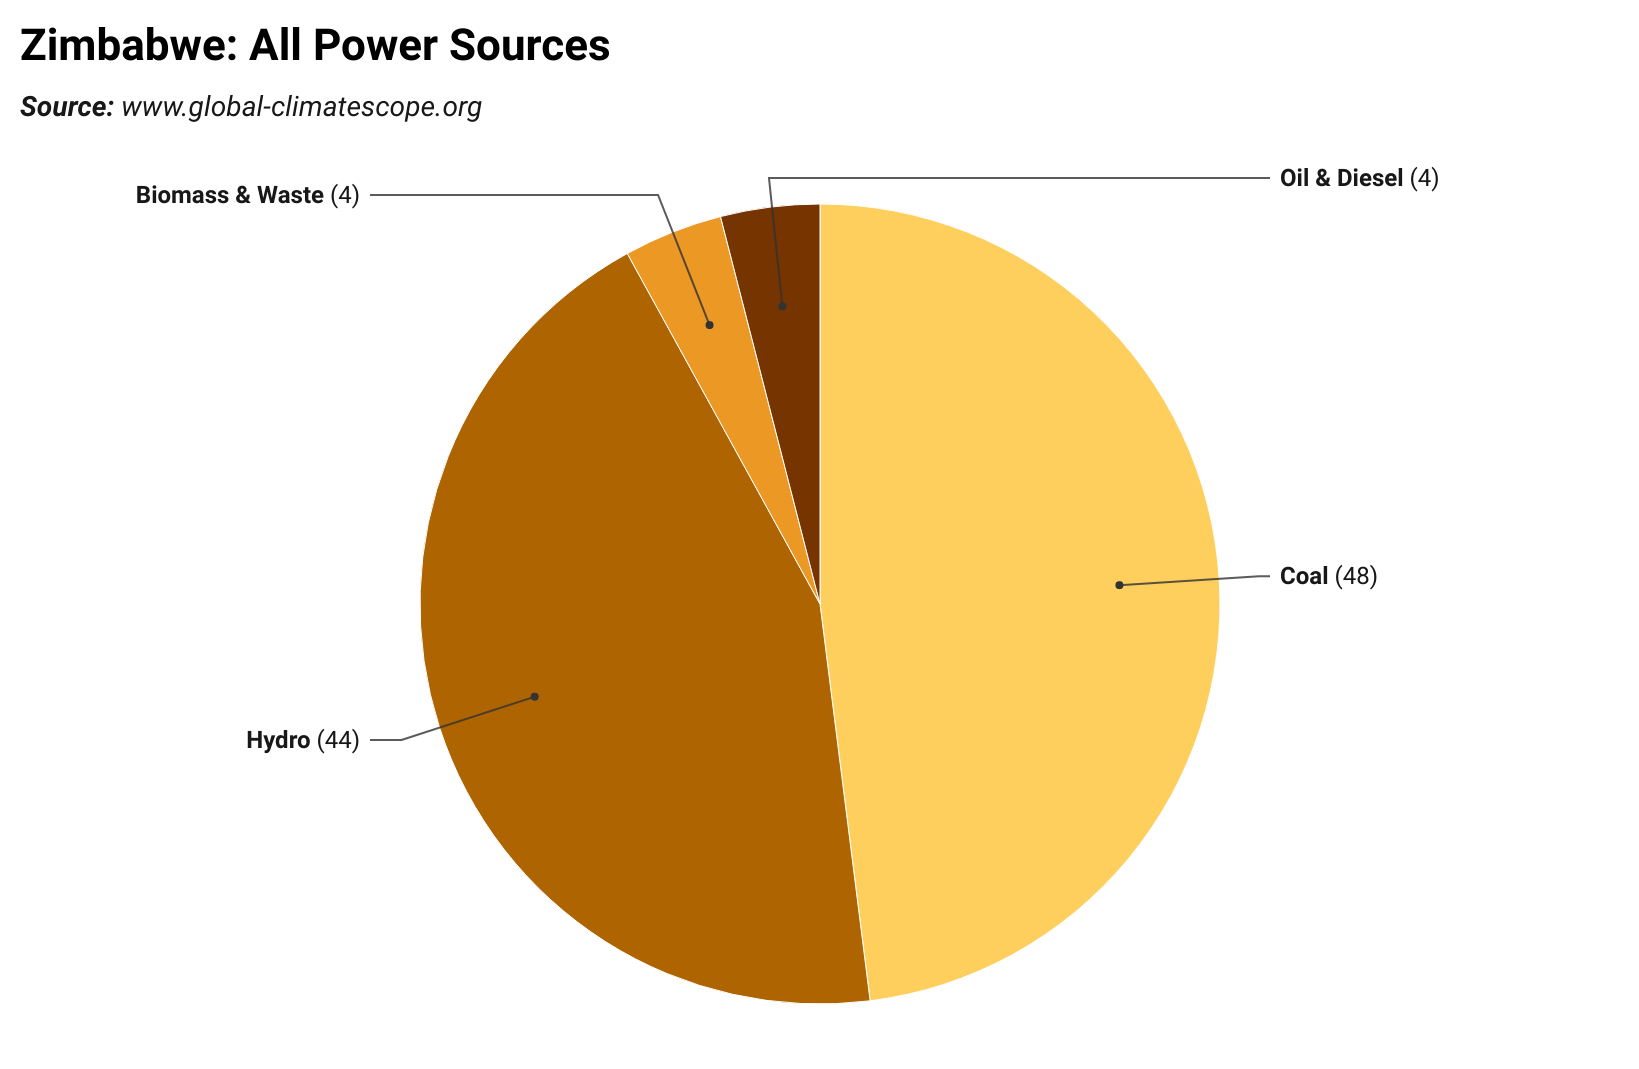 Pie chart of hydro-power sources in Zambia